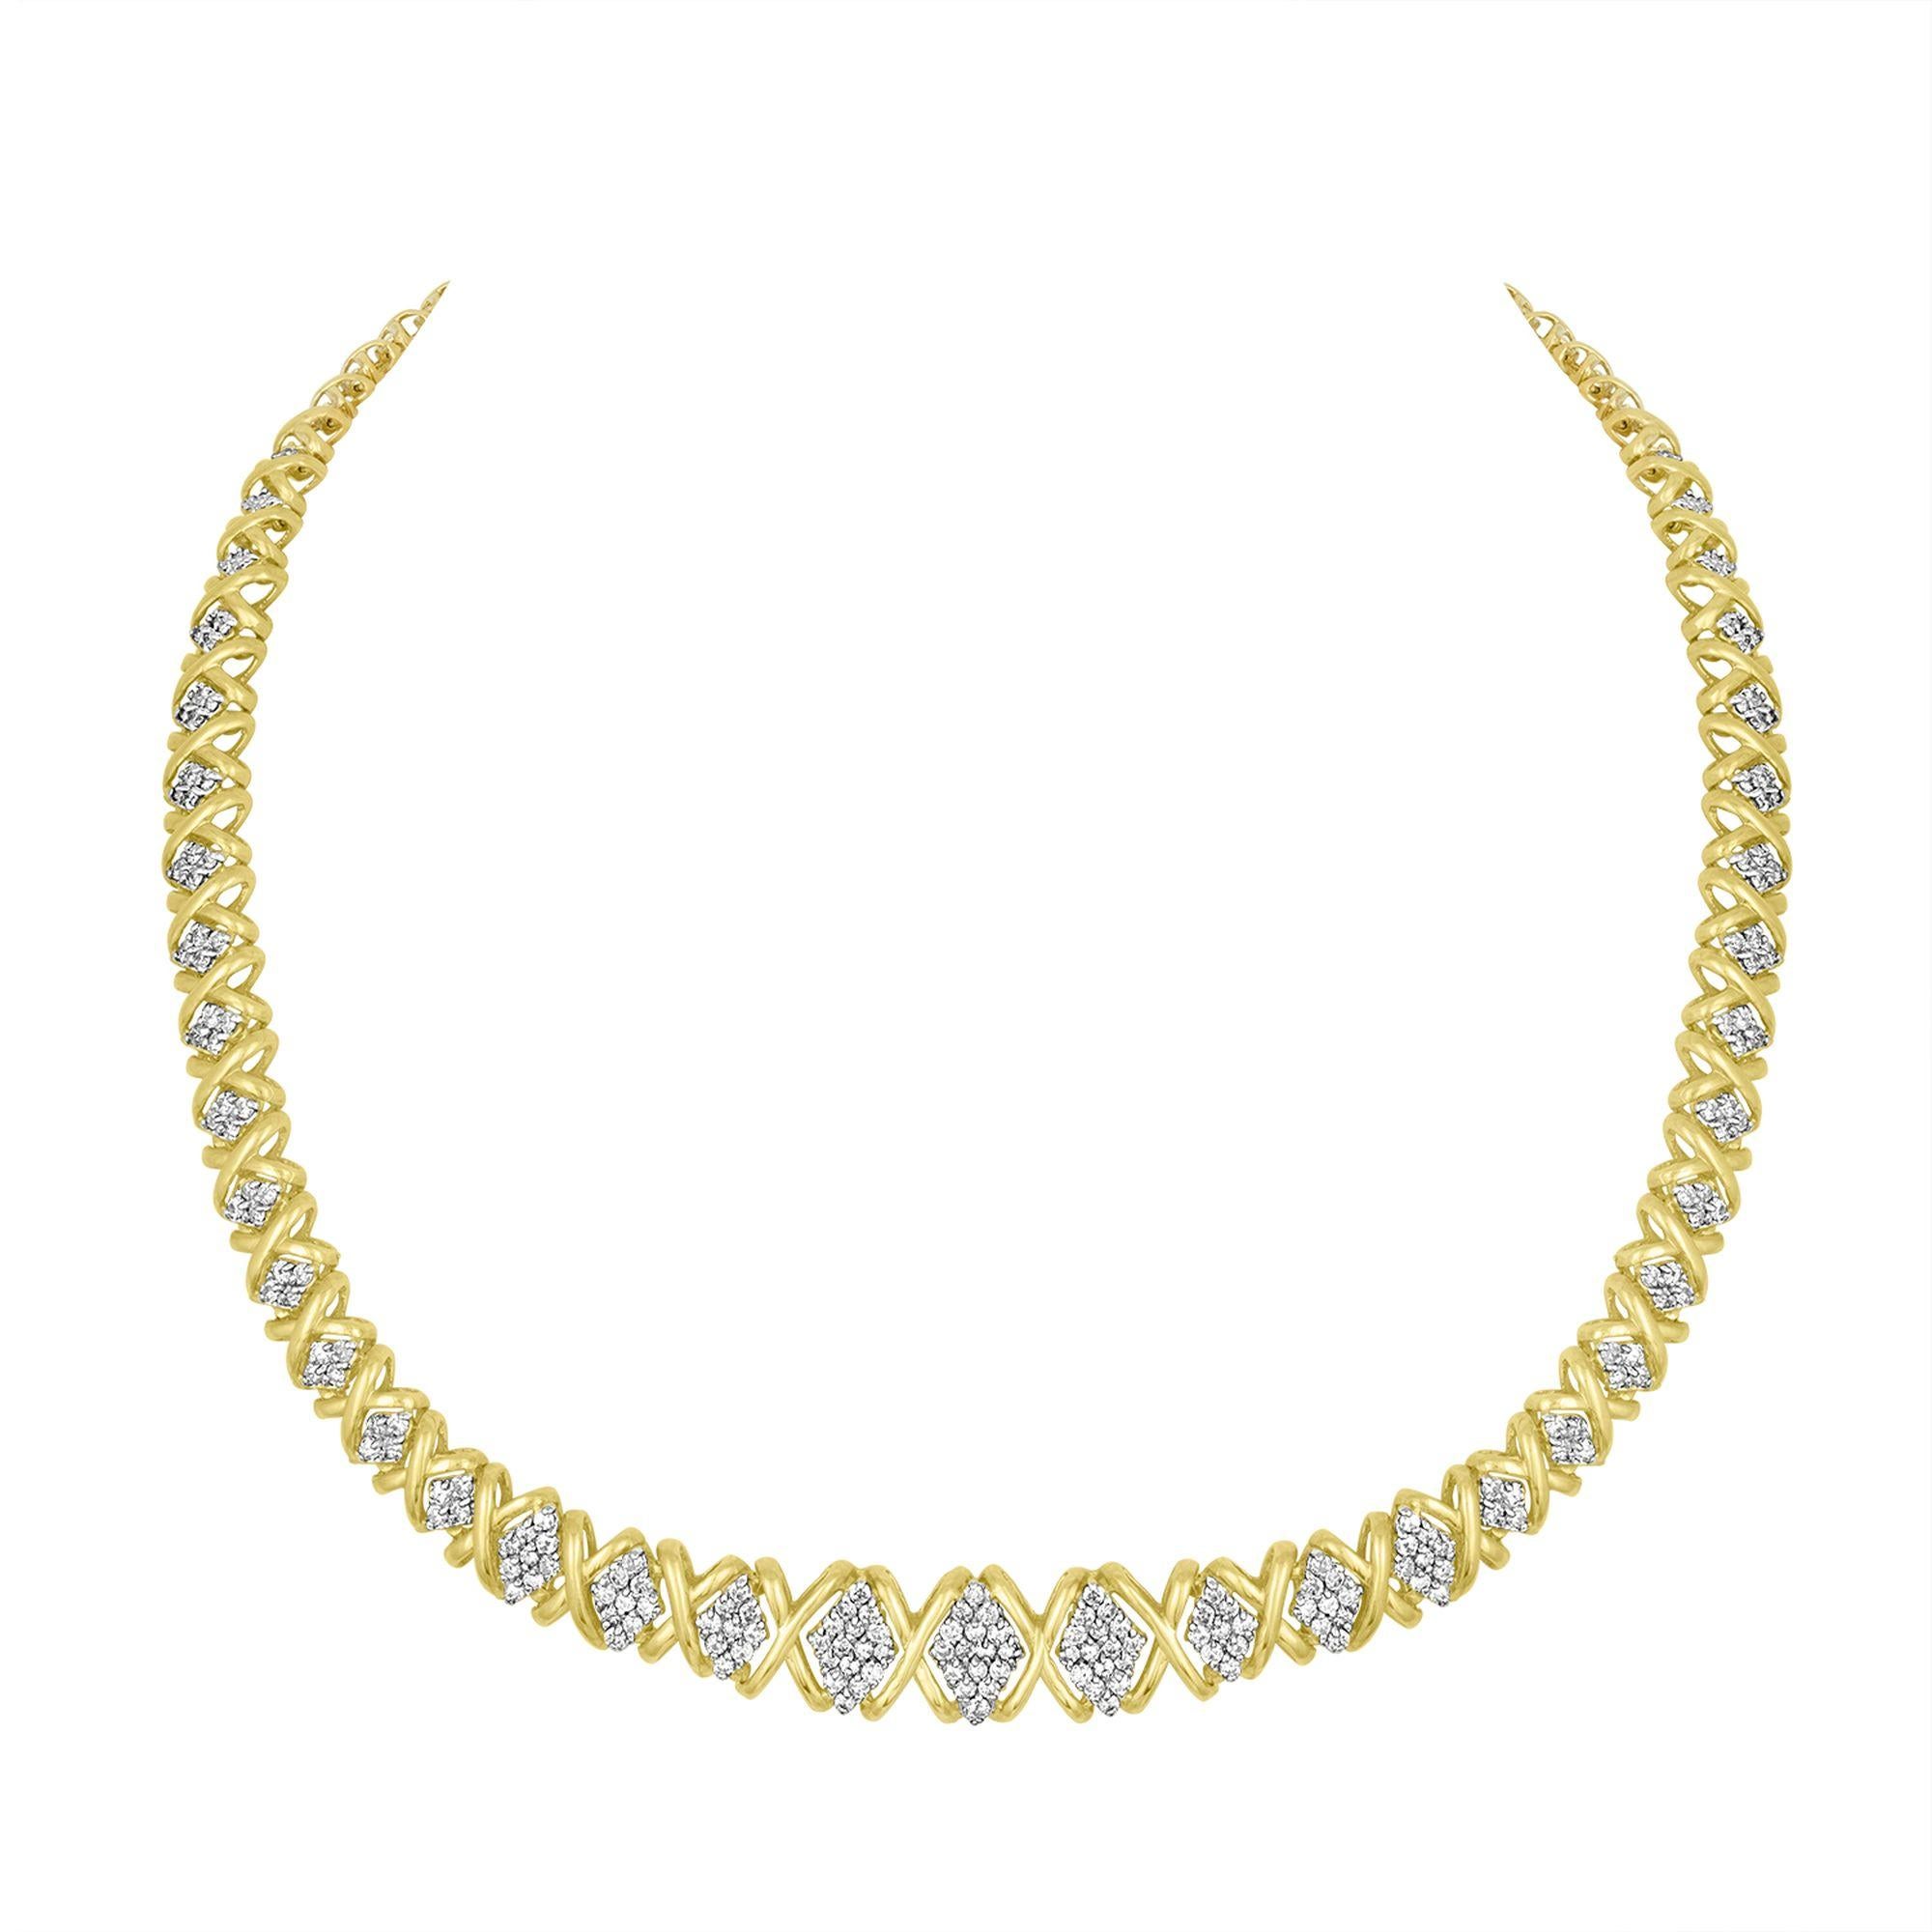 This gorgeous riviera statement necklace is created in the finest 10k yellow gold. Boasting a glamorous appearance, this beautiful piece is embellished with yellow gold 